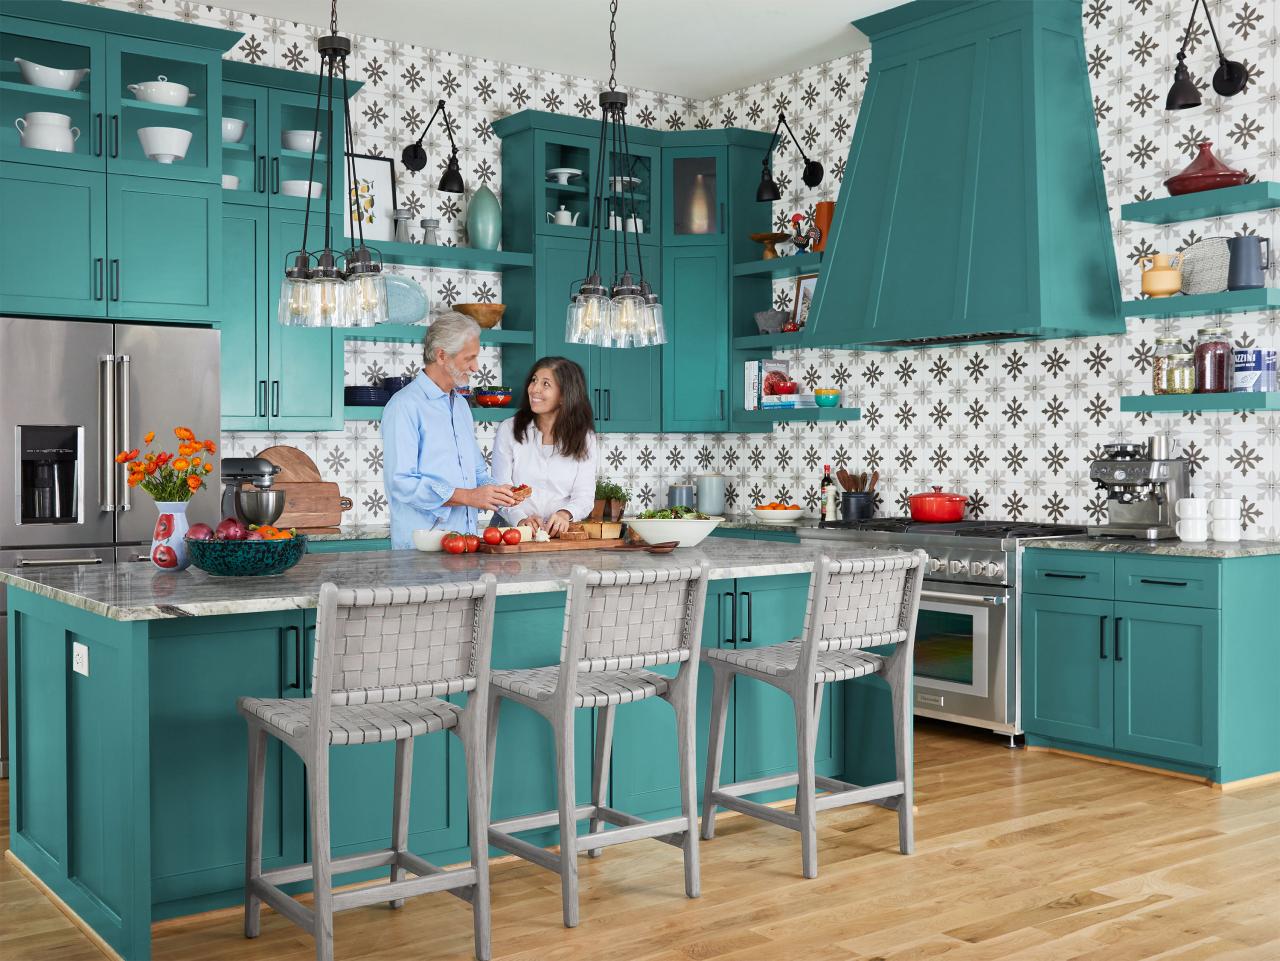 Tour a Bright and Traditional Kitchen Decorated In Shades of Teal